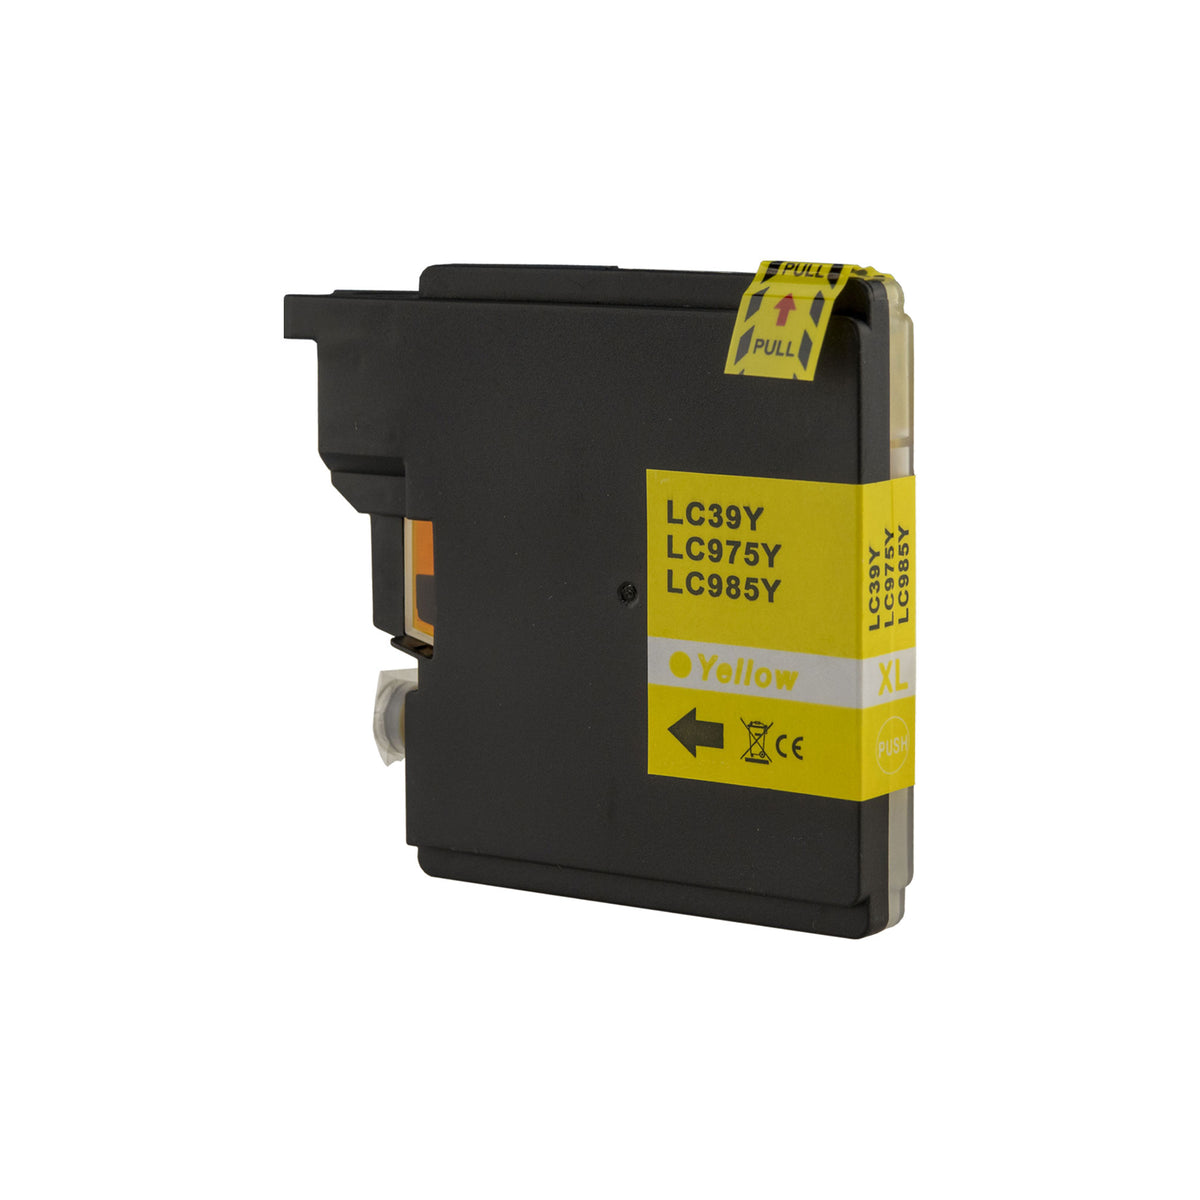 1x Compatible Brother LC-39 Yellow Ink Cartridges